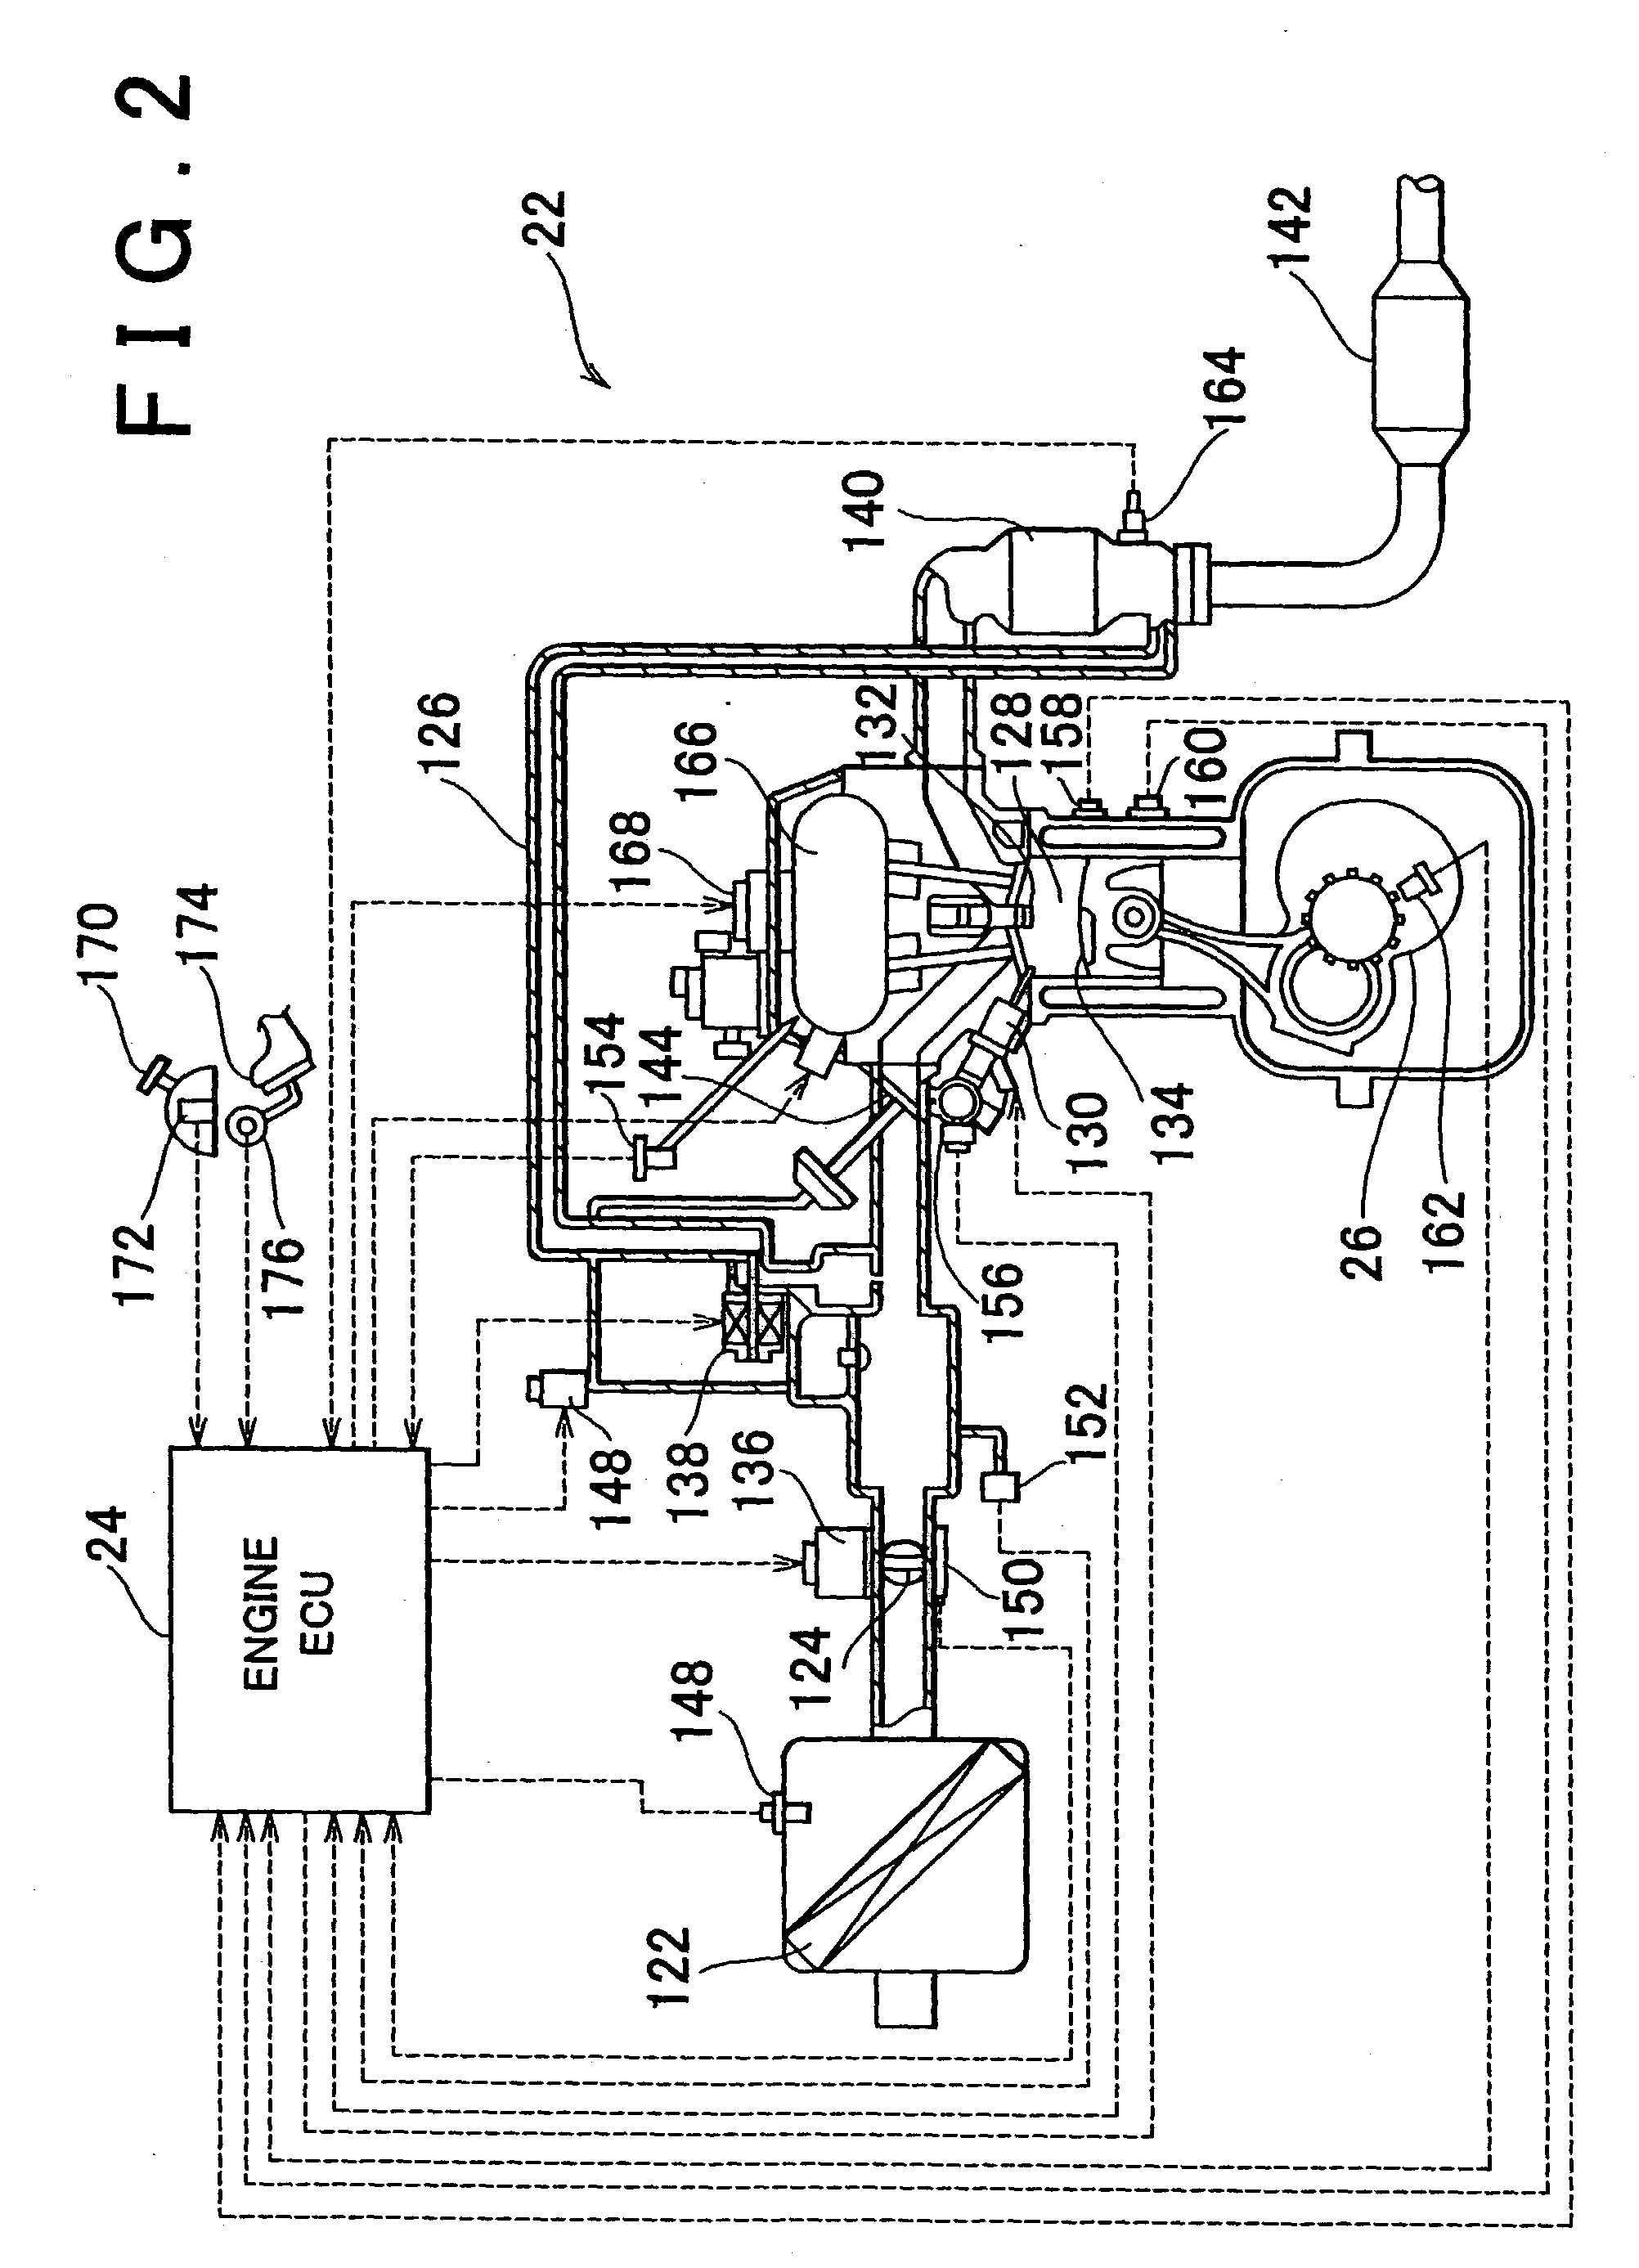 Control system and method for motor vehicles